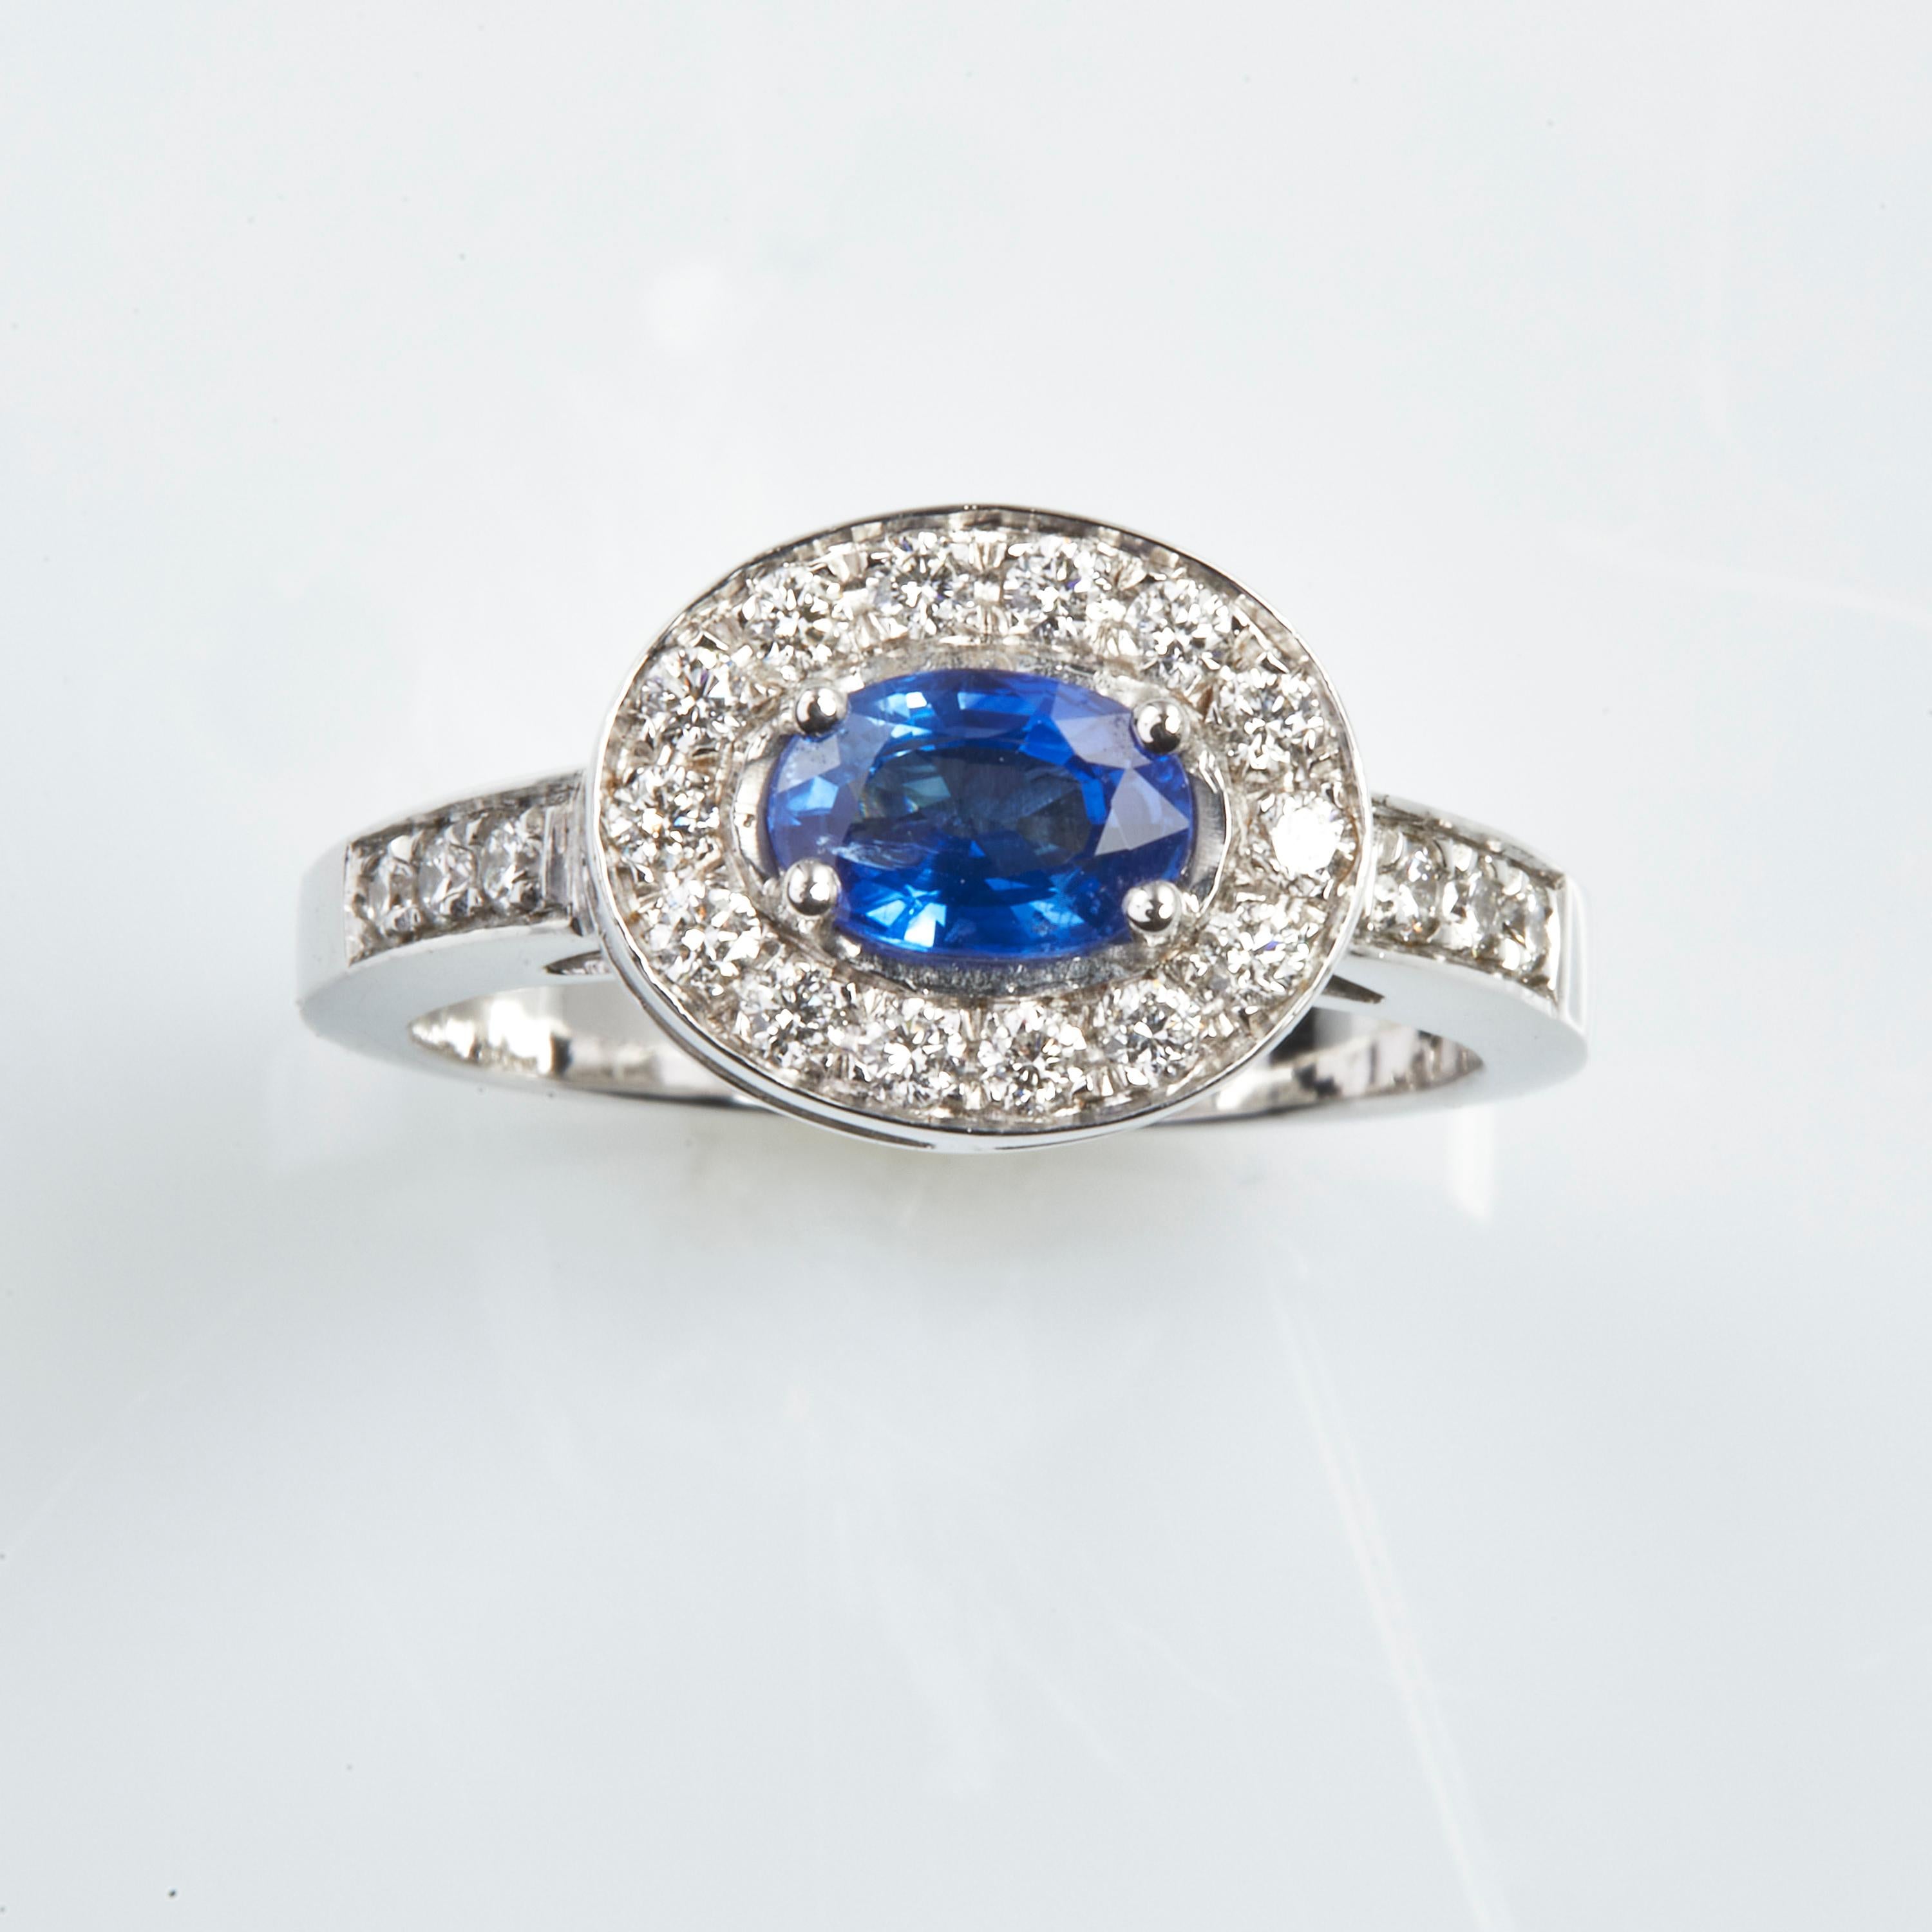 18 Karat White Gold Diamond and Sapphire Cocktail Ring

20 Diamonds 0.30 Carat
1  Sapphir 0.85 Carat

Size EU 50 US 5,3


Founded in 1974, Gianni Lazzaro is a family-owned jewelery company based out of Düsseldorf, Germany.
Although rooted in